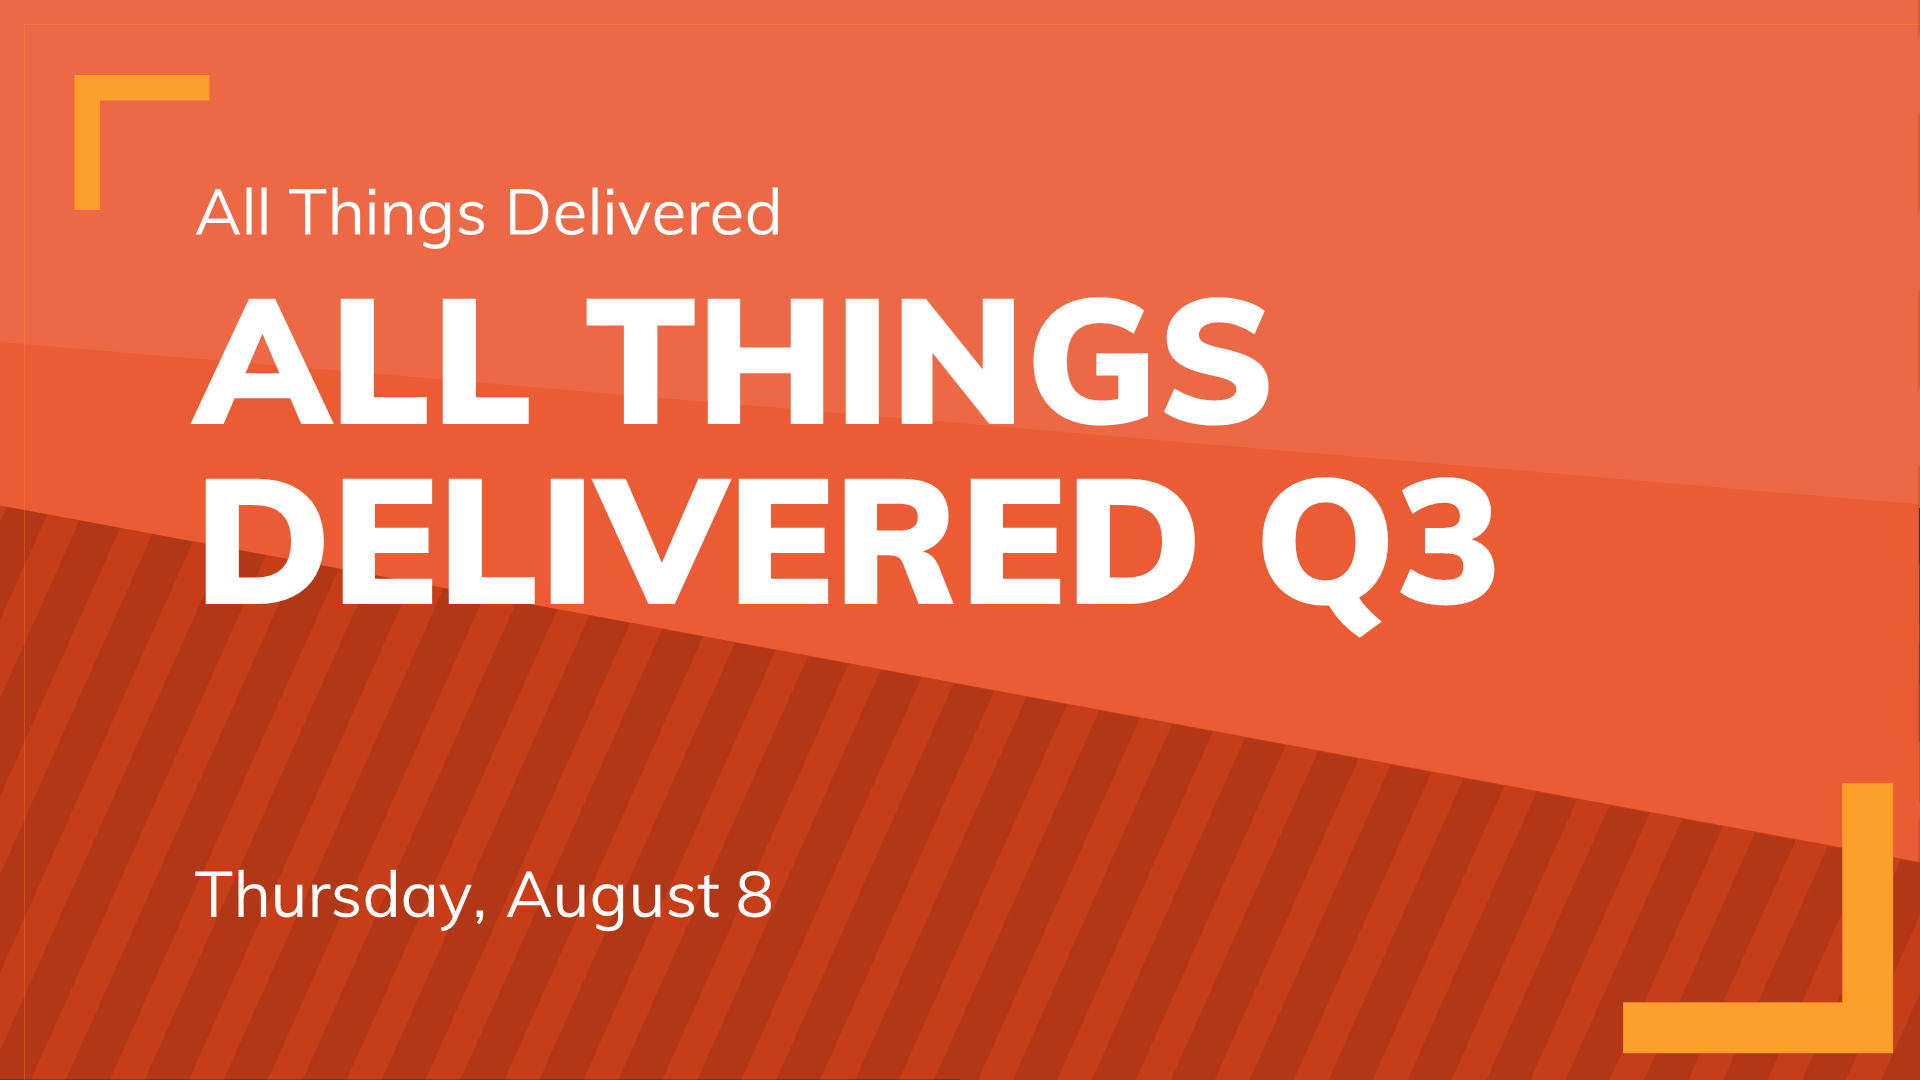 All Things Delivered Q3: Thursday, August 8